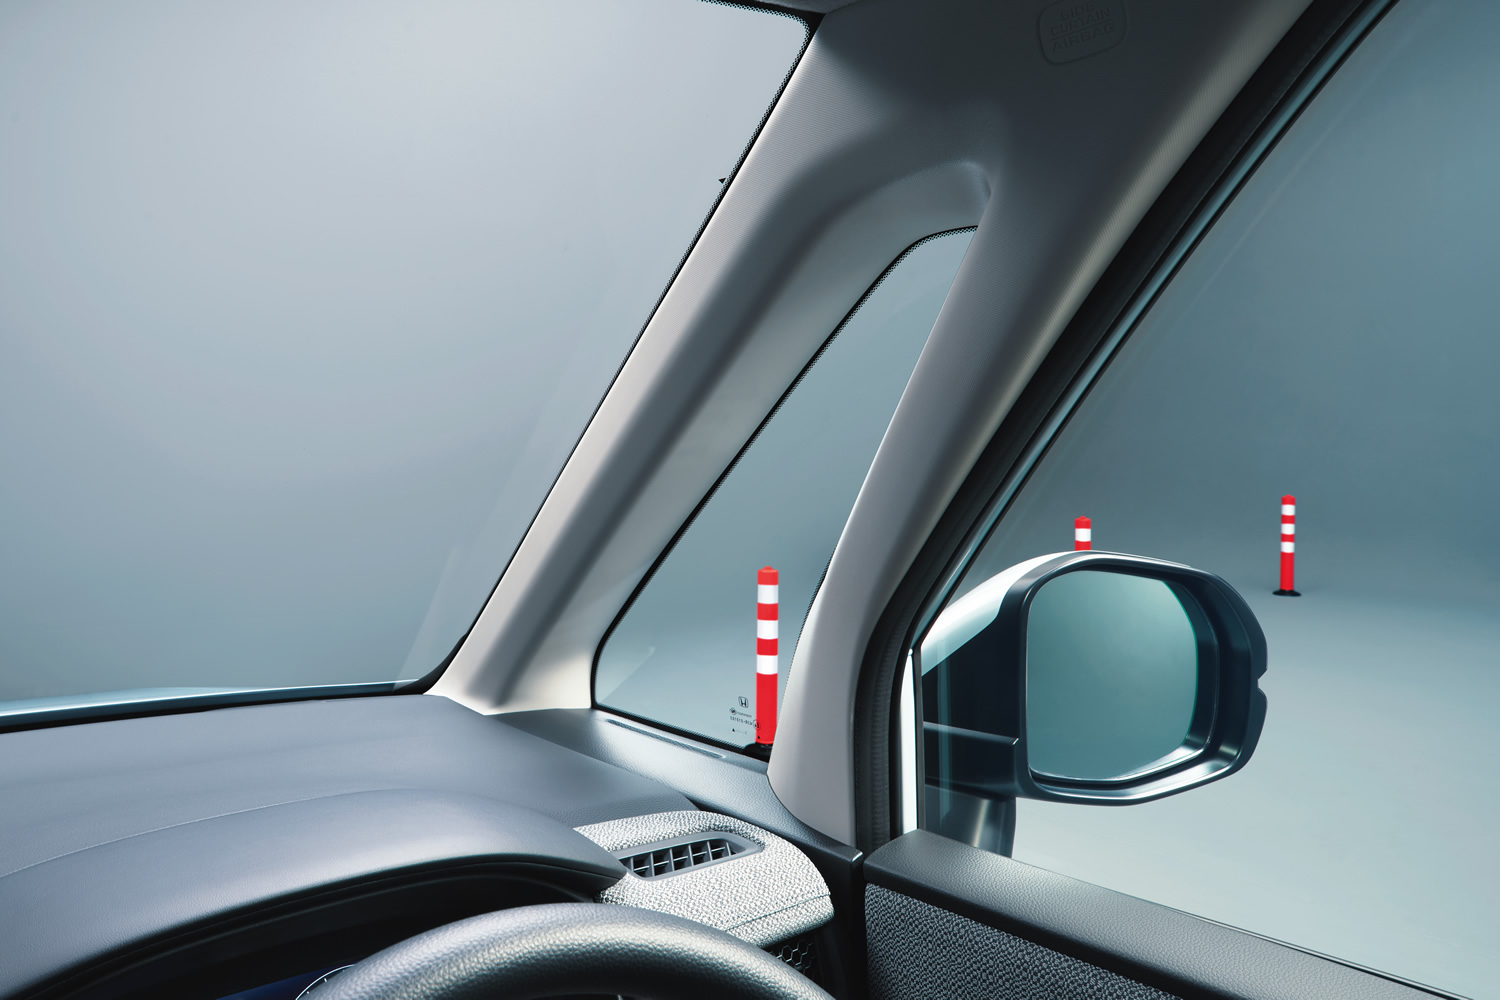 Redesigned A-pillars for better view and easy to drive